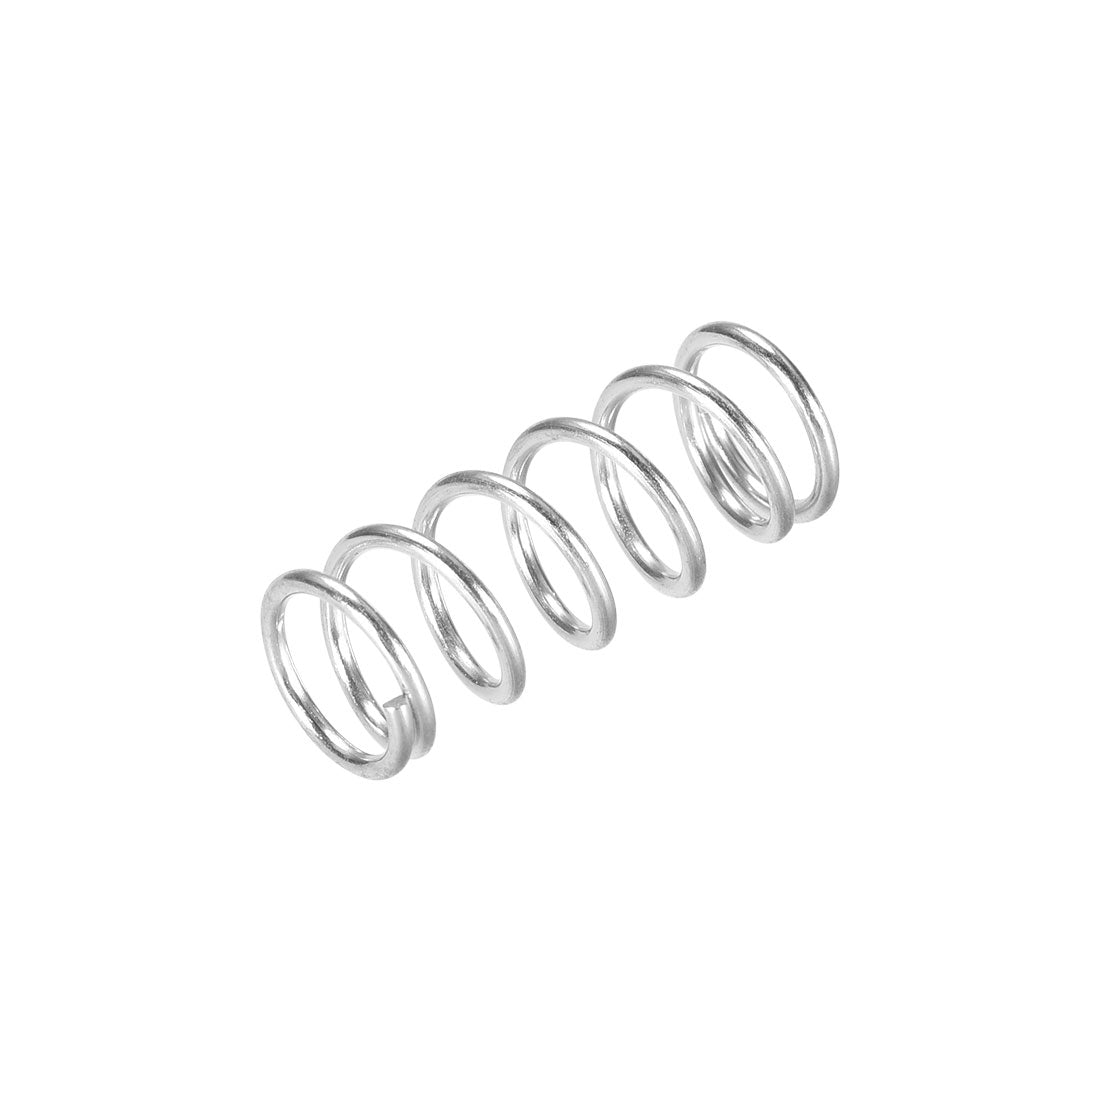 uxcell Uxcell Heated Bed Springs for 3D Printer Extruder Compression Spring, 9 x 22 mm 40pcs